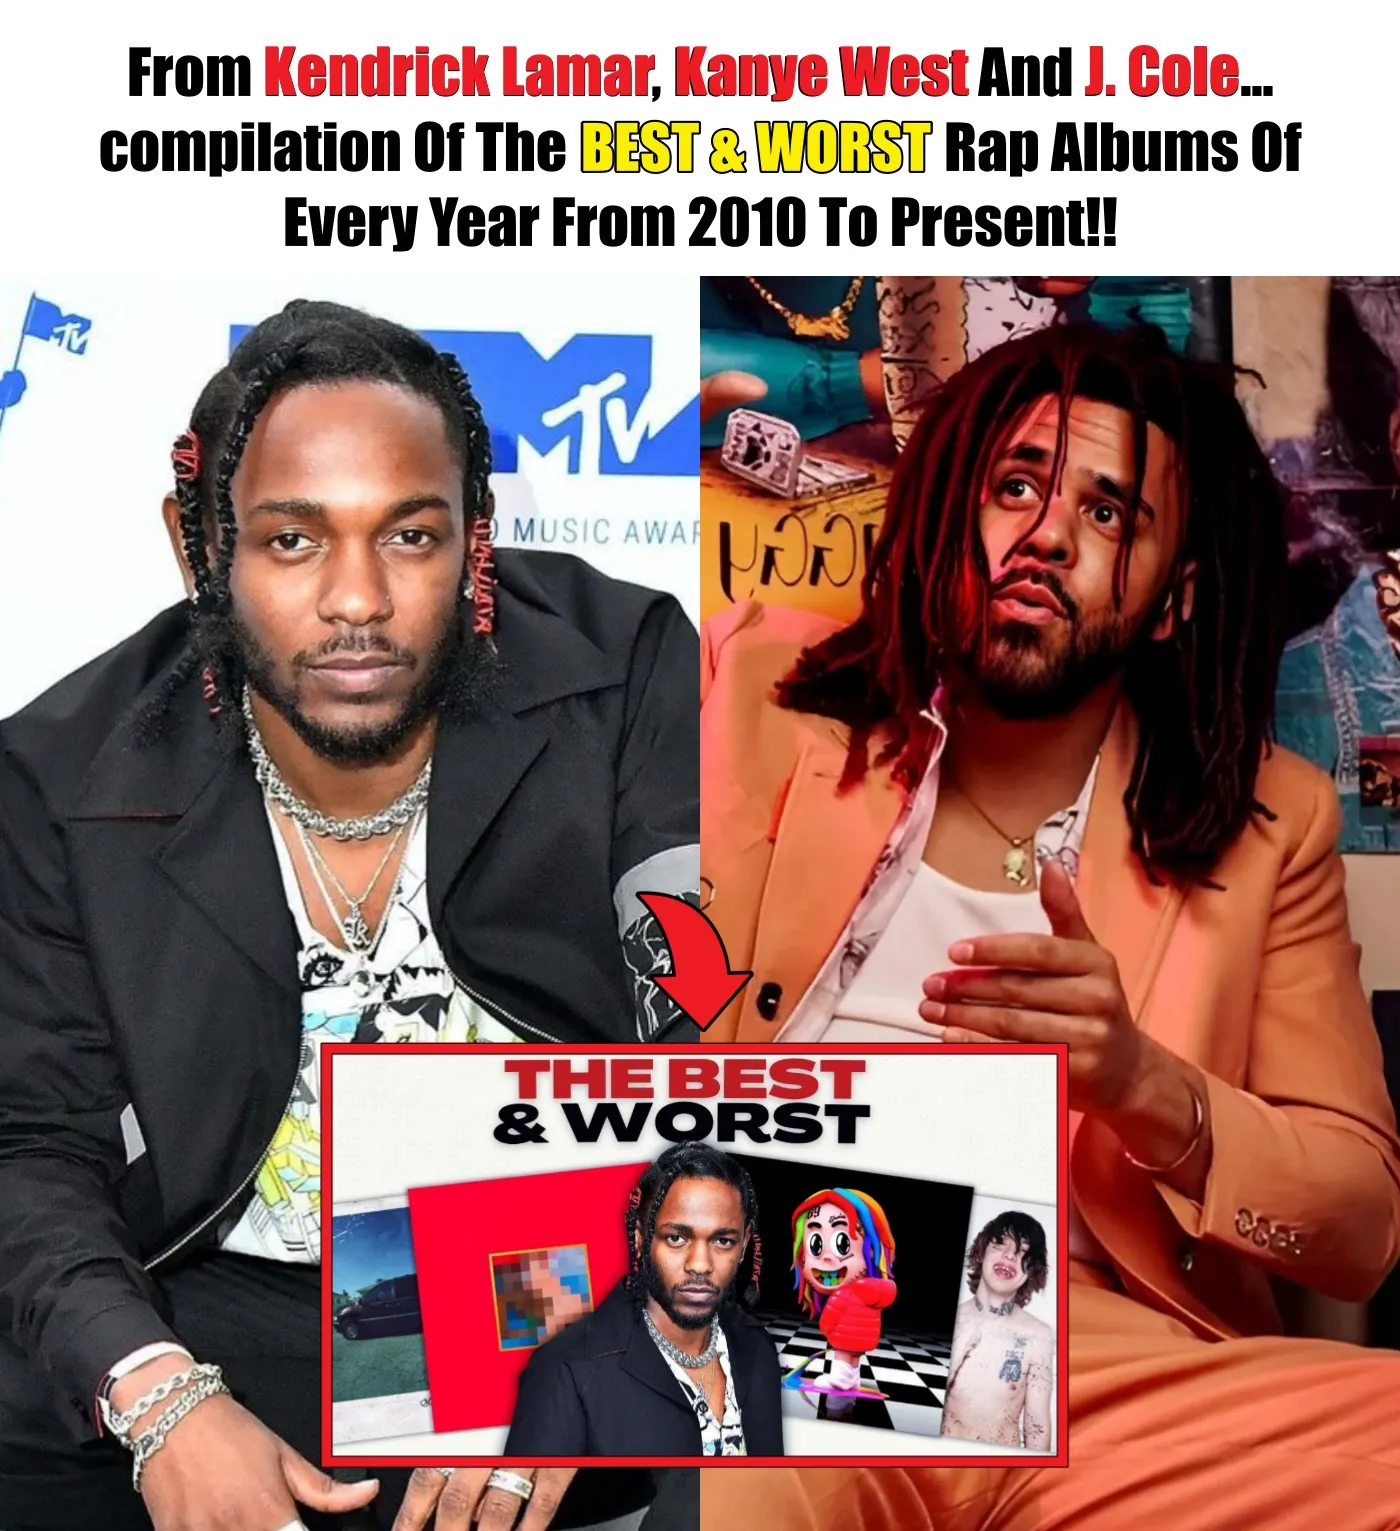 Cover Image for From Kendrick Lamar, Kanye West And J. Cole…Compilation Of The BEST & WORST Rap Albums Of Every Year From 2010 To Present!!